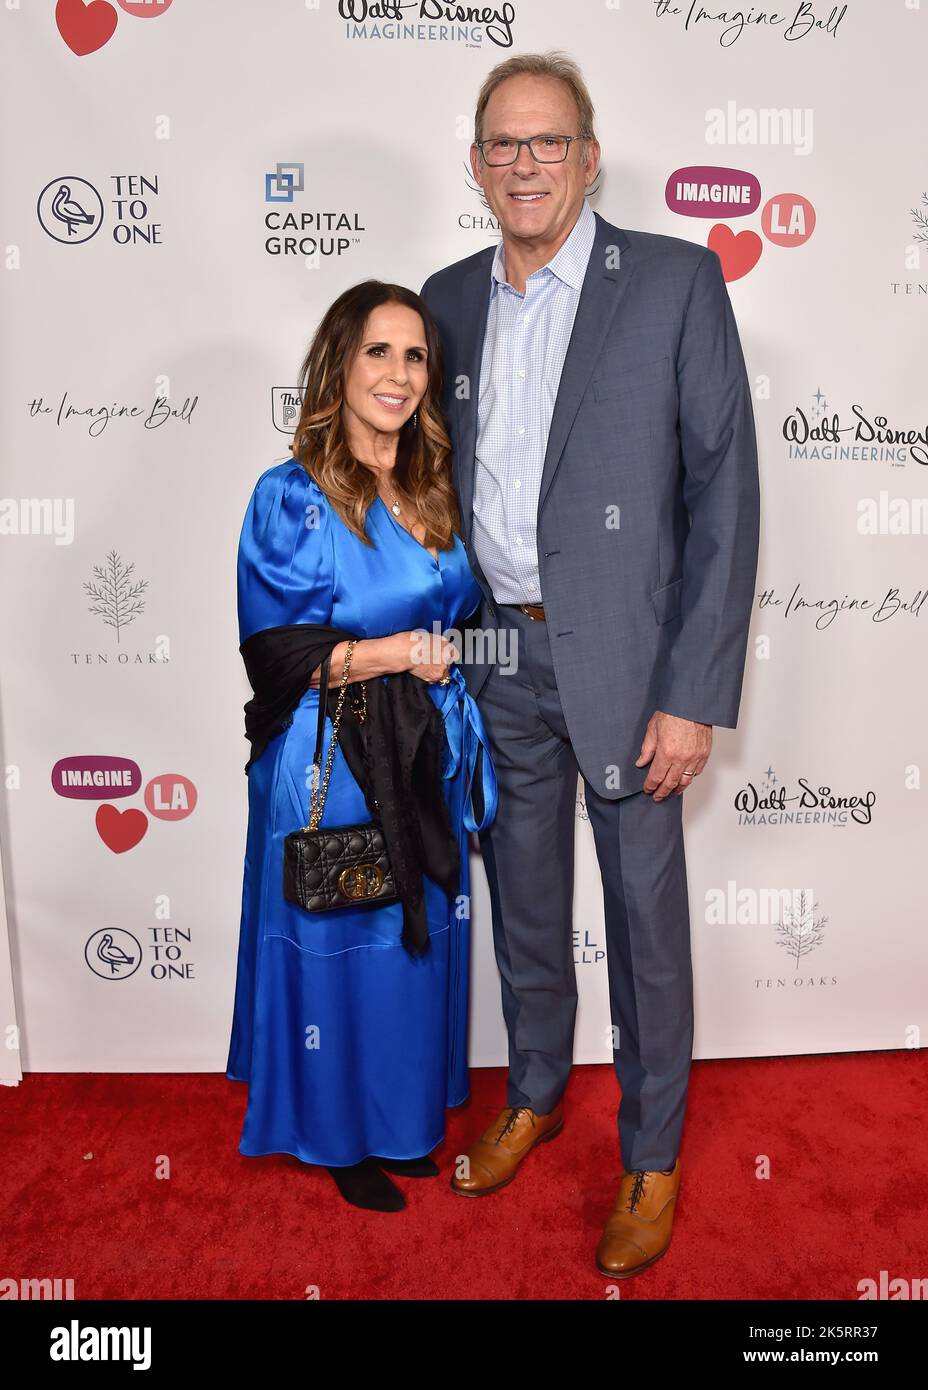 Los Angeles, USA. 09th Oct, 2022. Linda Rambis and Kurt Rambis walking the red carpet at The 7th Annual Imagine Ball presented by Imagine LA at The Peppermint Club in Los Angeles, CA on October 9, 2022. (Photo By Scott Kirkland/Sipa USA) Credit: Sipa USA/Alamy Live News Stock Photo